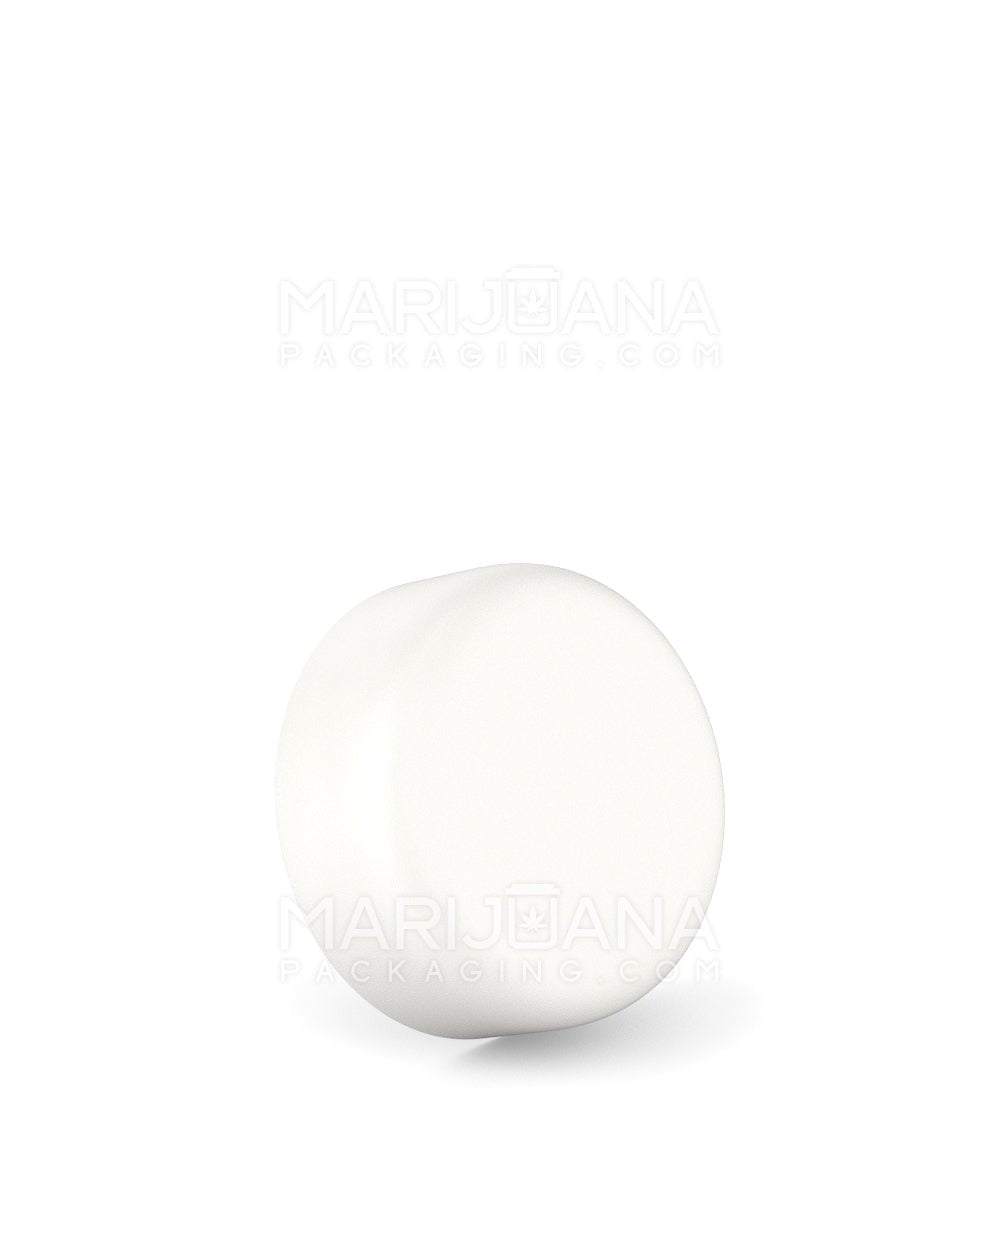 POLLEN GEAR | HiLine Child Resistant Smooth Push Down & Turn Plastic Round Caps w/ 3-Layer Liner | 29mm - Matte White - 308 Count - 1